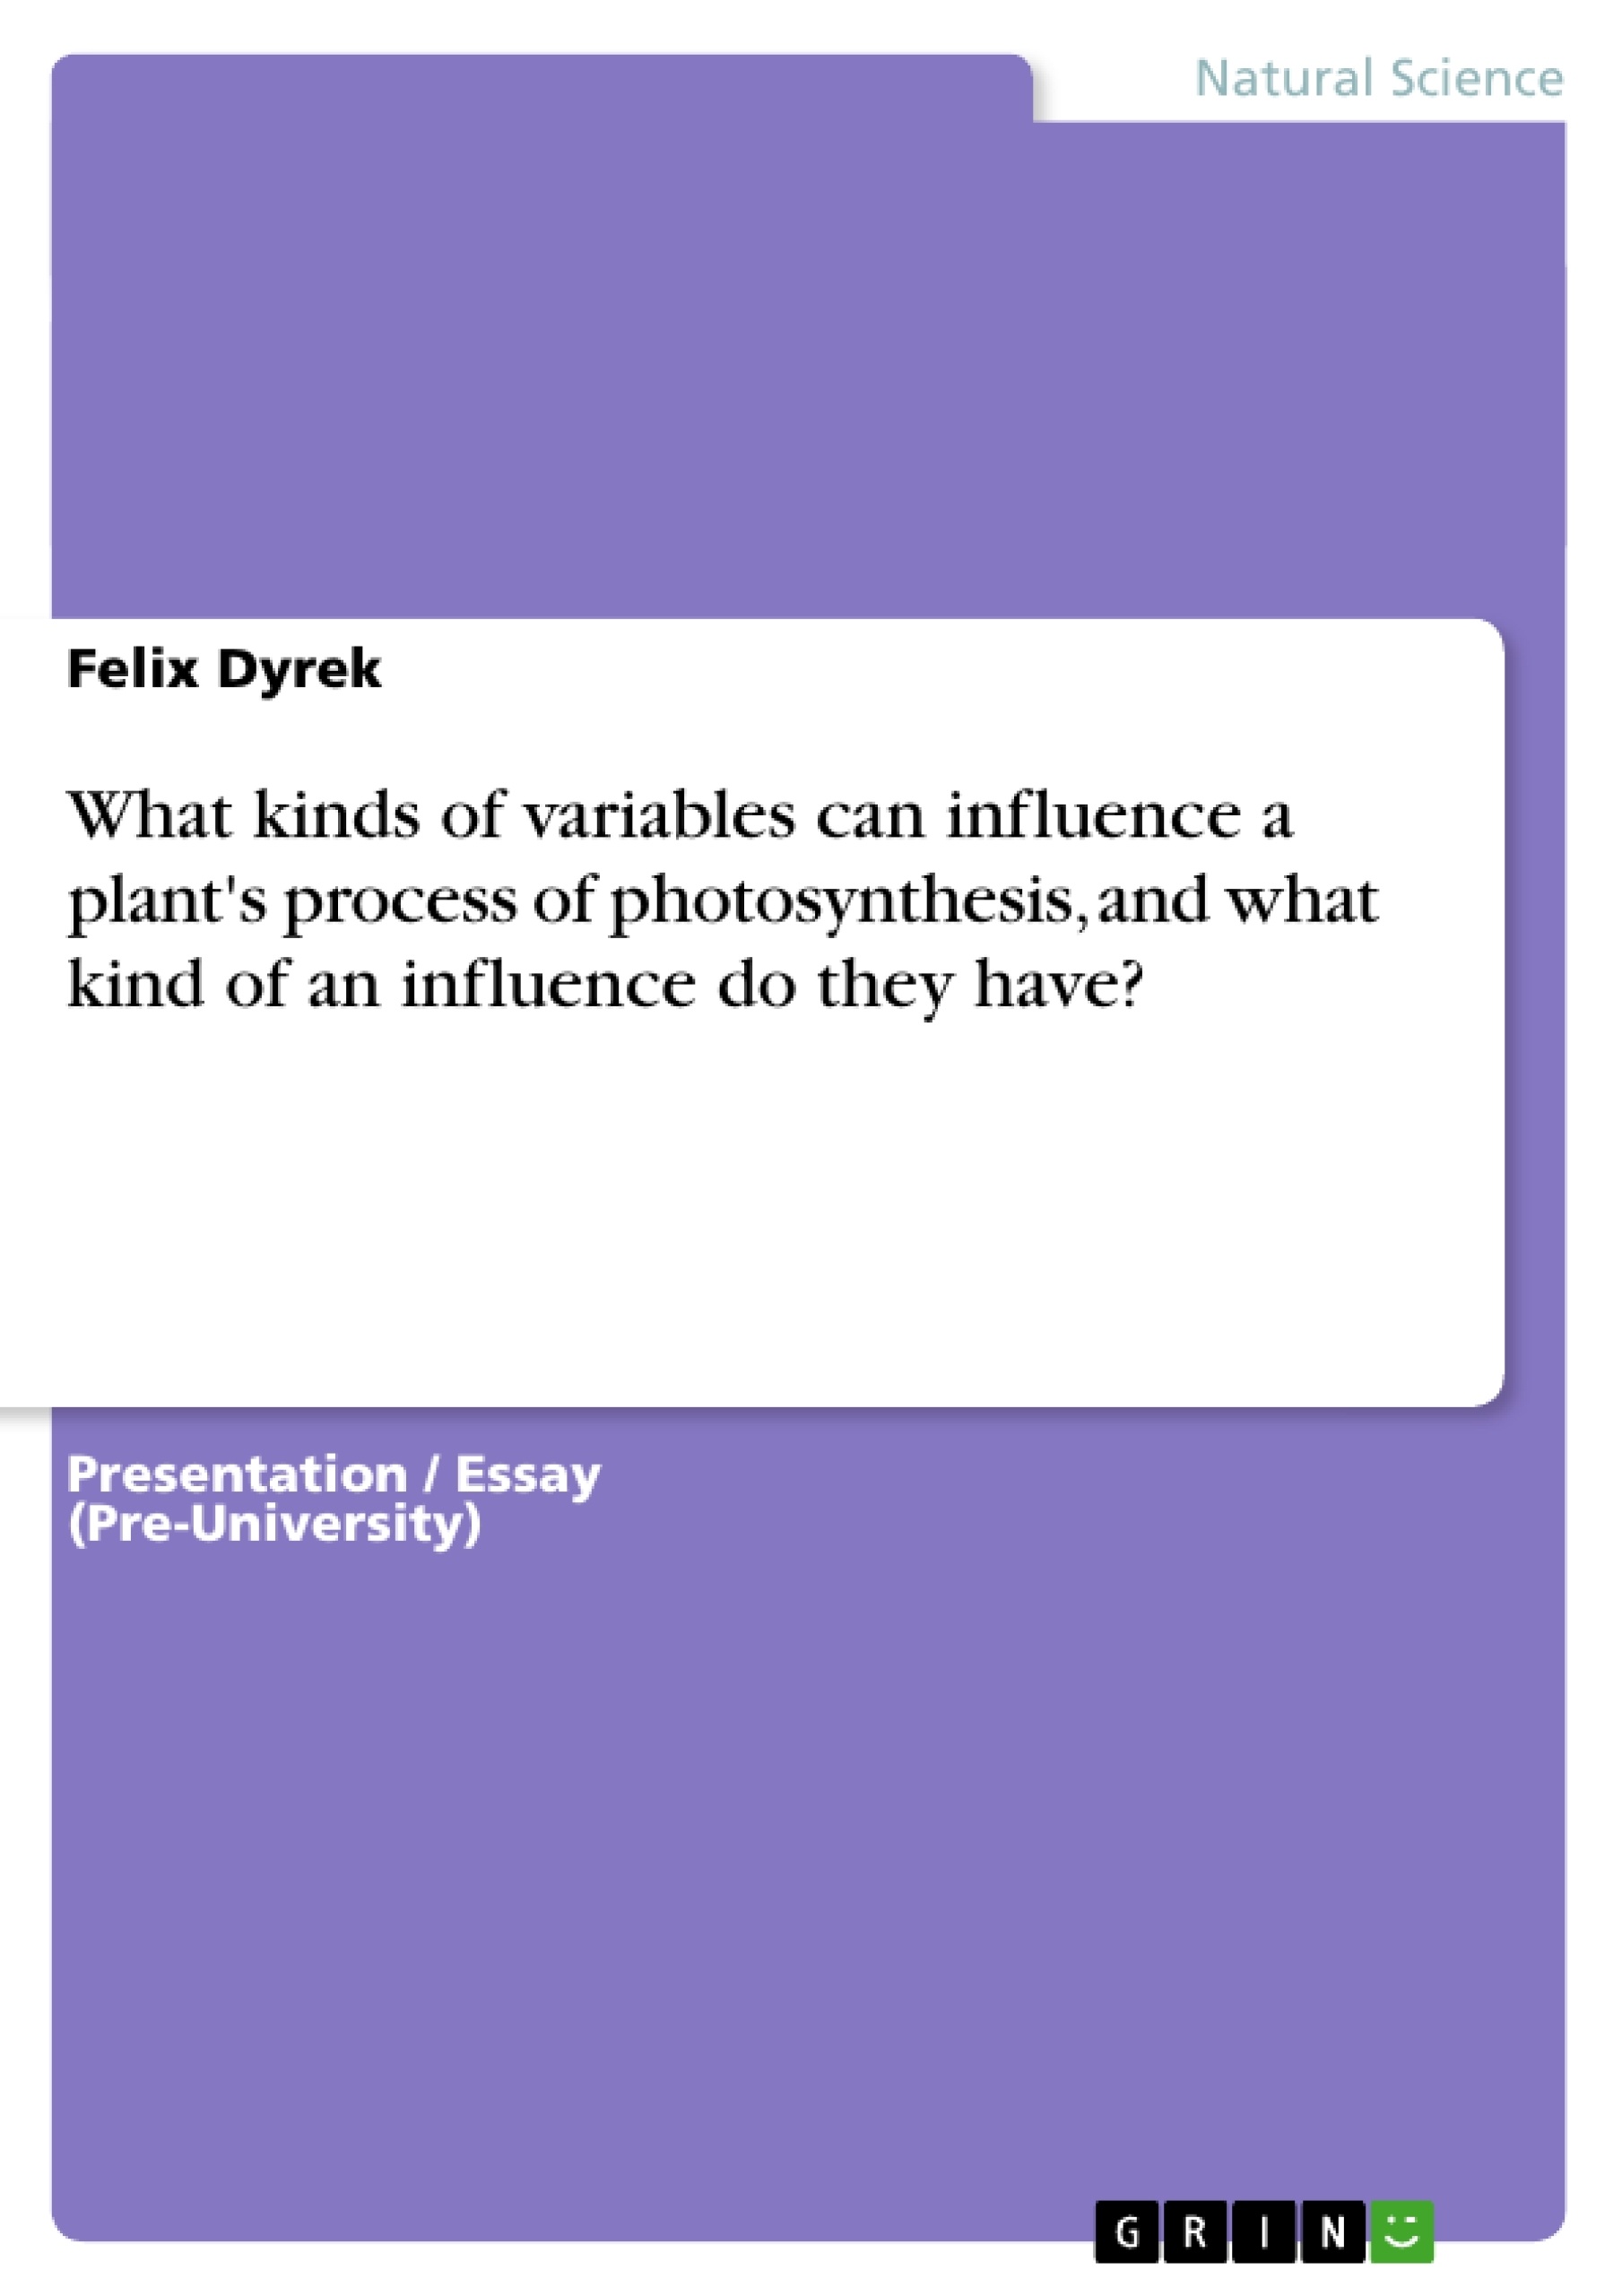 Title: What kinds of variables can influence a plant's process of photosynthesis, and what kind of an influence do they have?